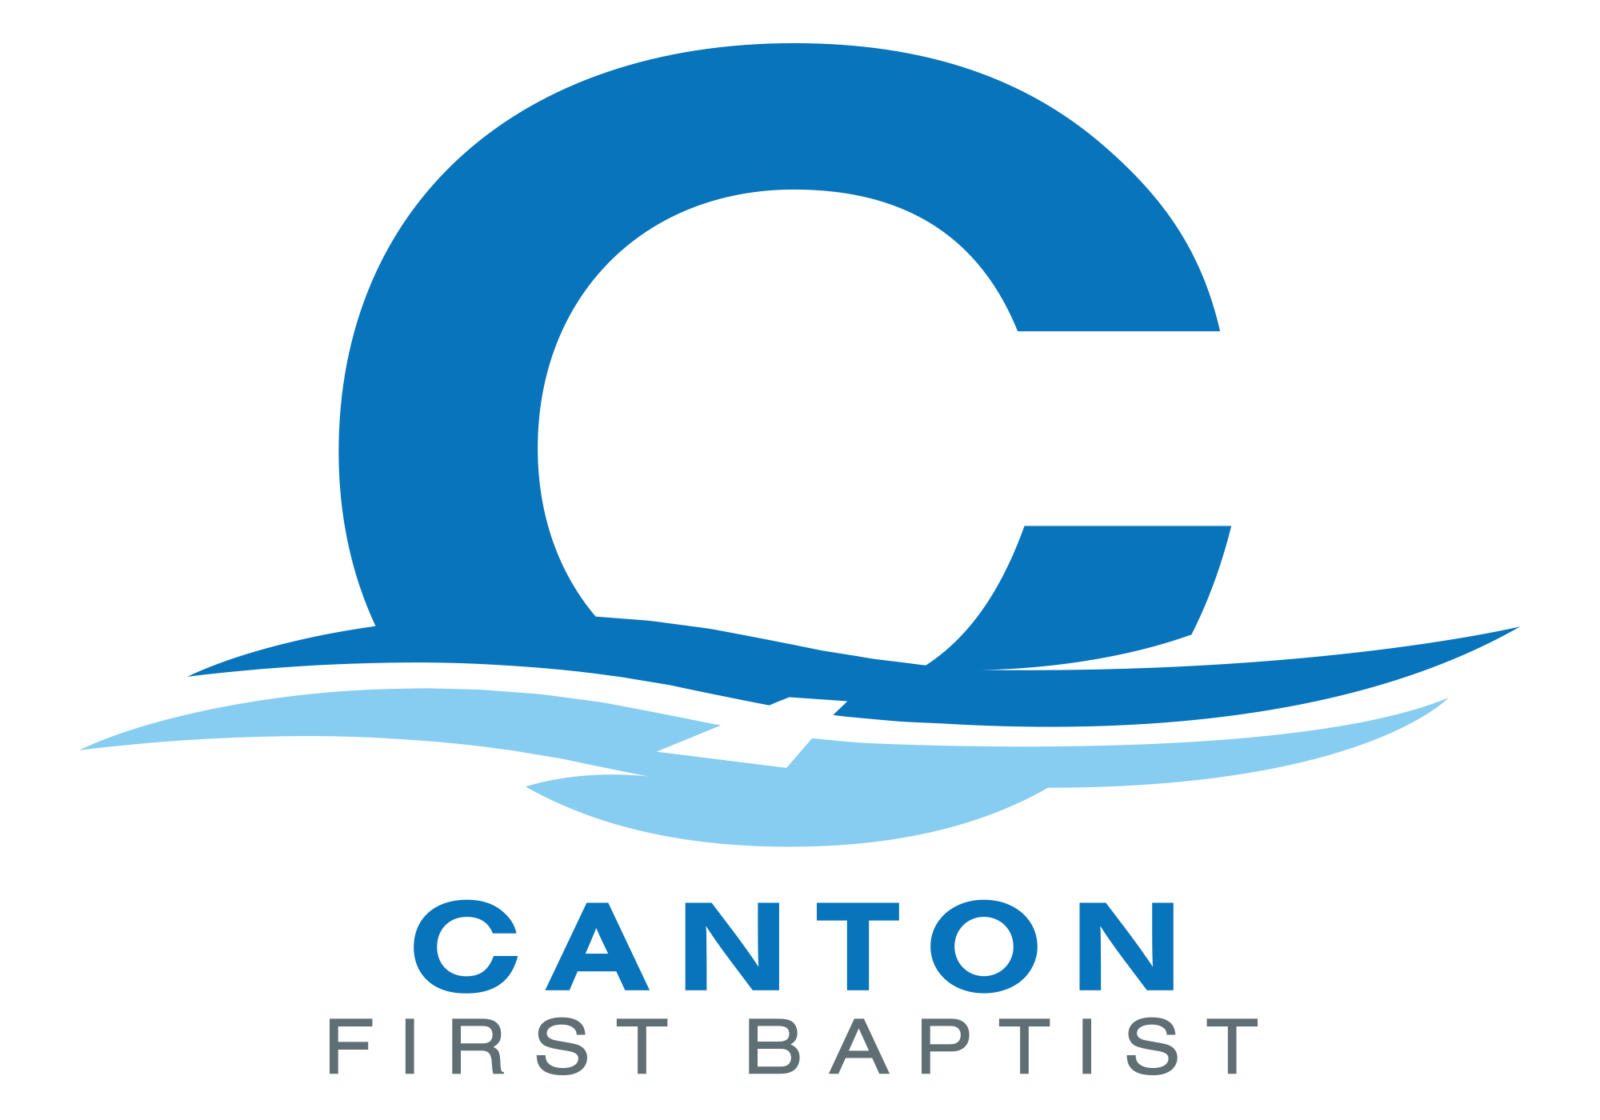 Mission Graphics was honored to help Canton First Baptist to rebrand